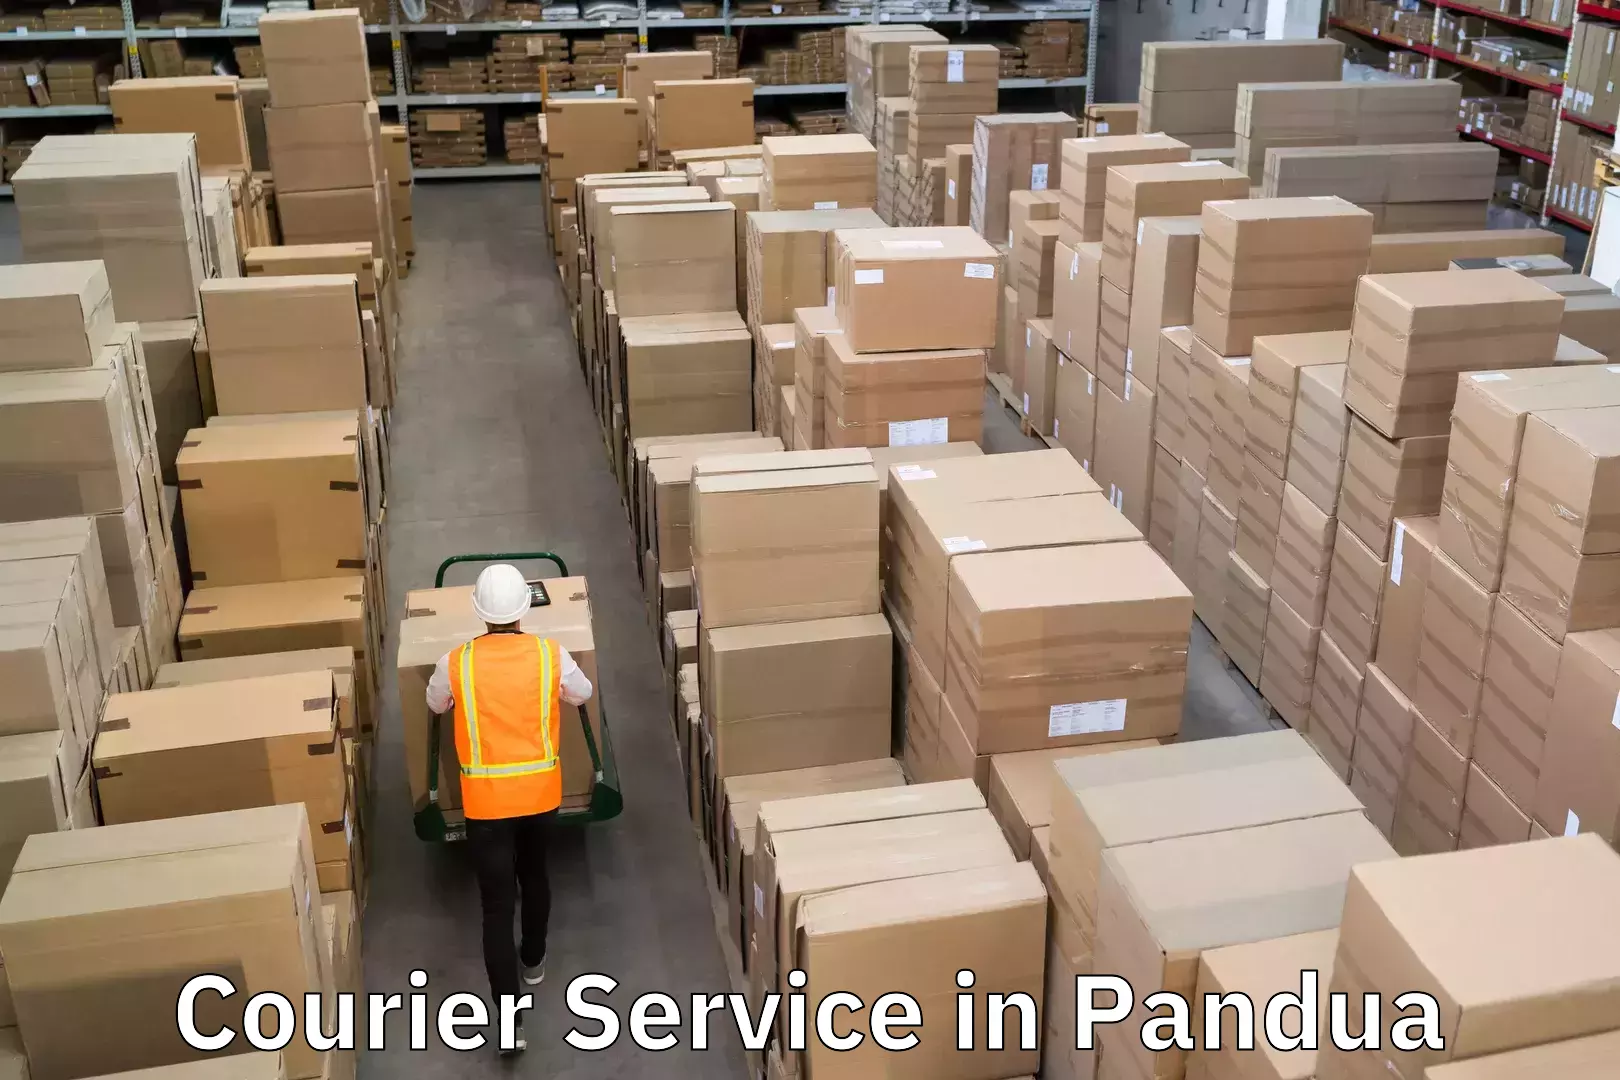 Optimized delivery routes in Pandua